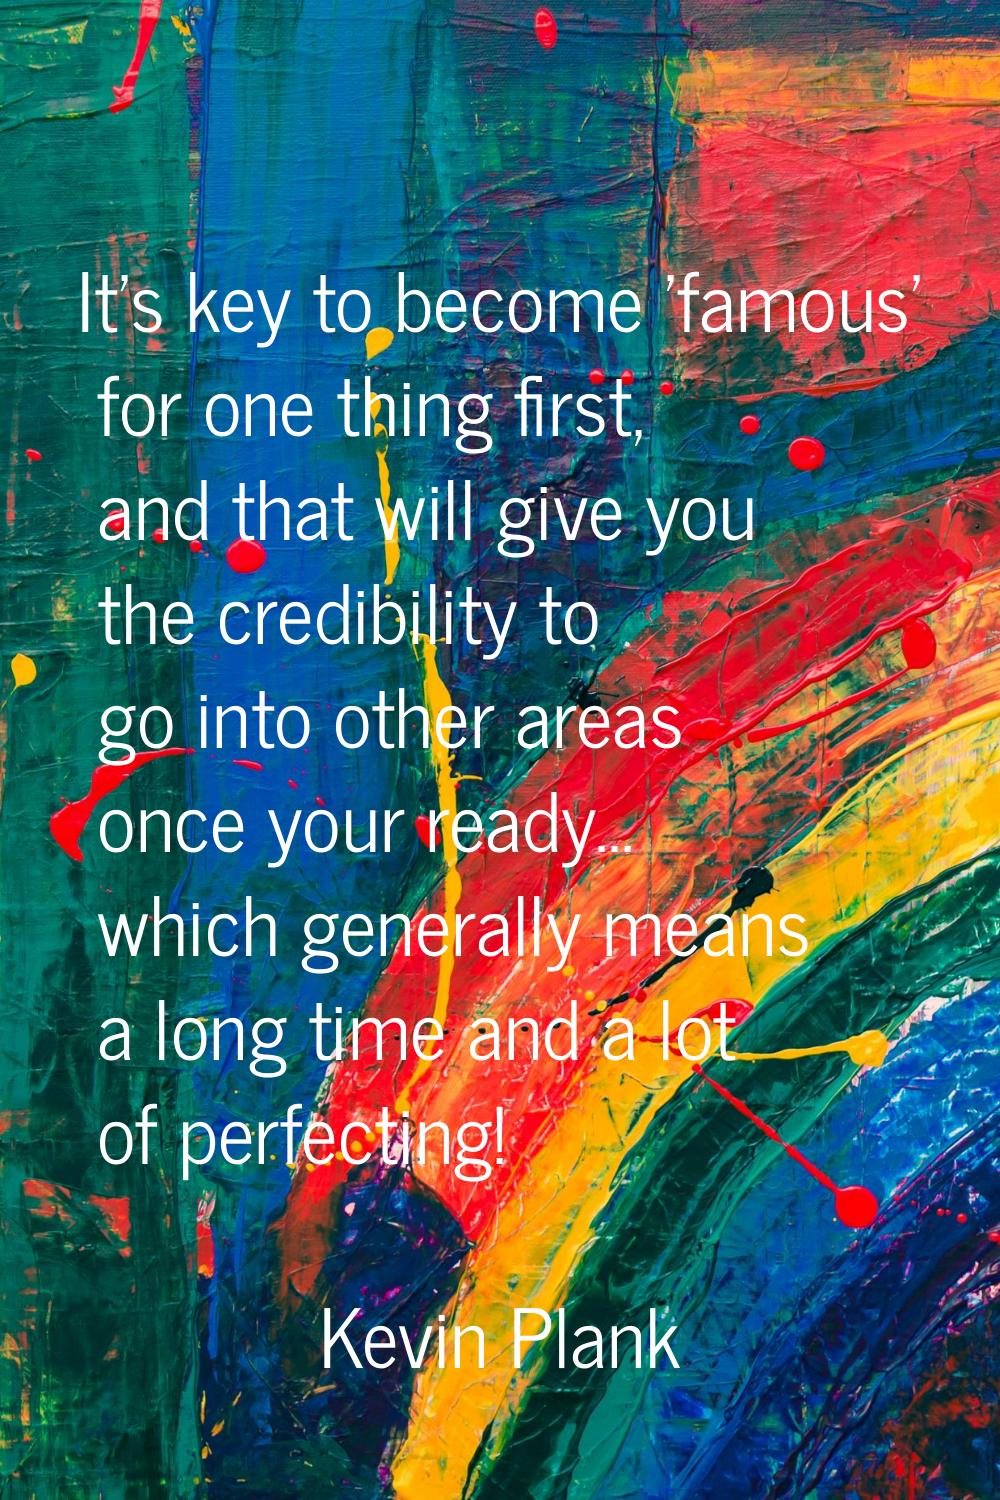 It's key to become 'famous' for one thing first, and that will give you the credibility to go into 